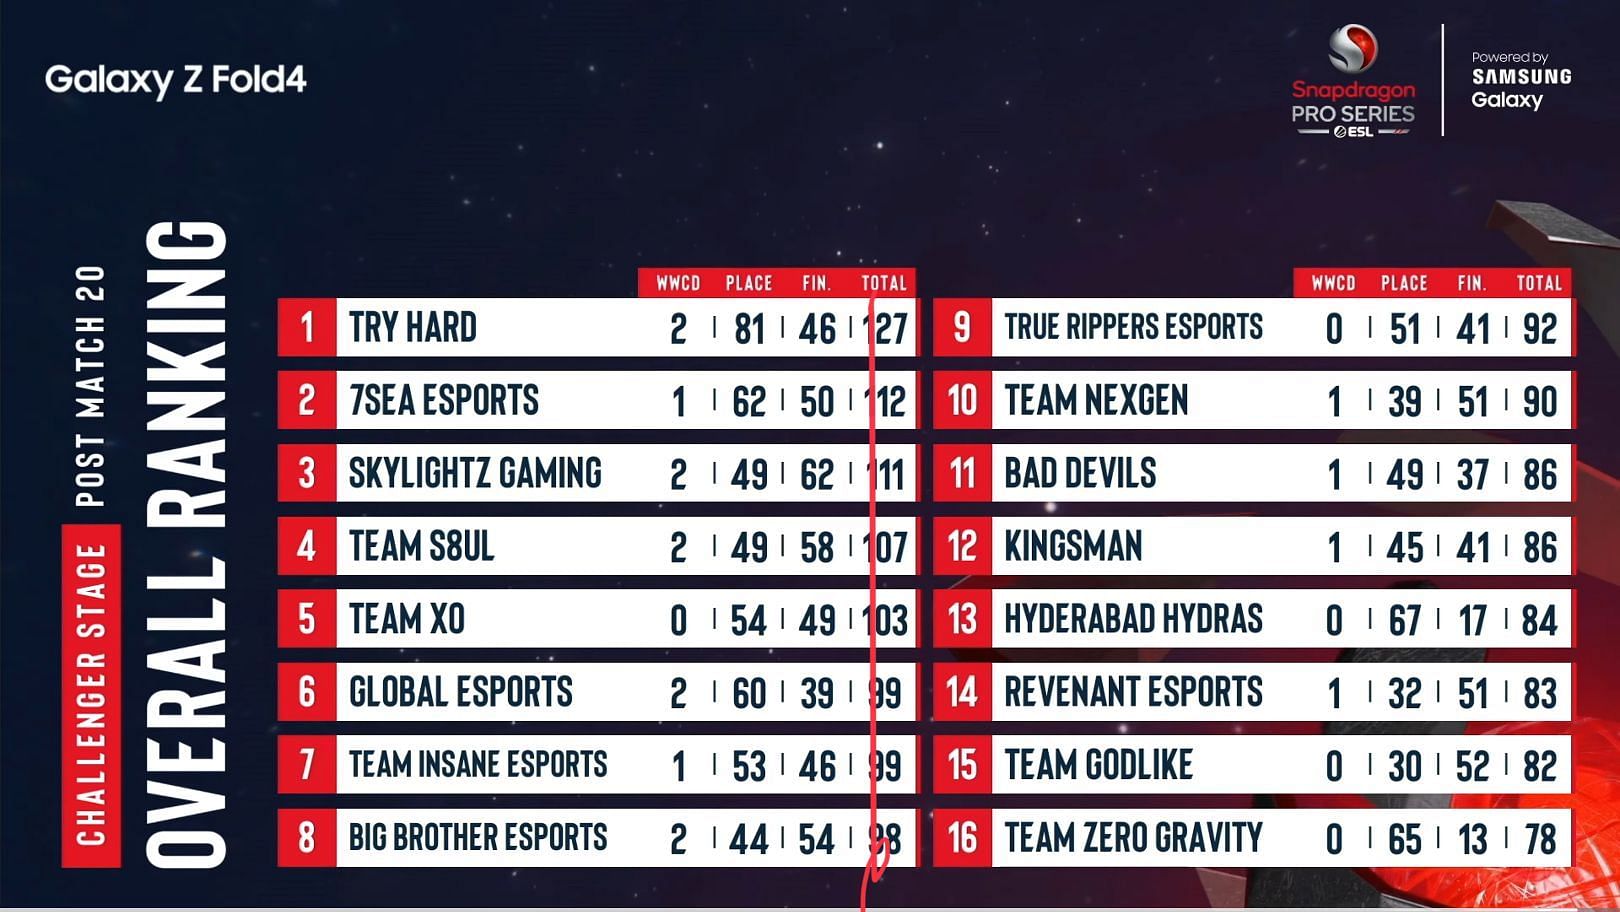 Try Hard moved up to pole position after PUBG New State Challenger Day 4 (Image via Nodwin Gaming)